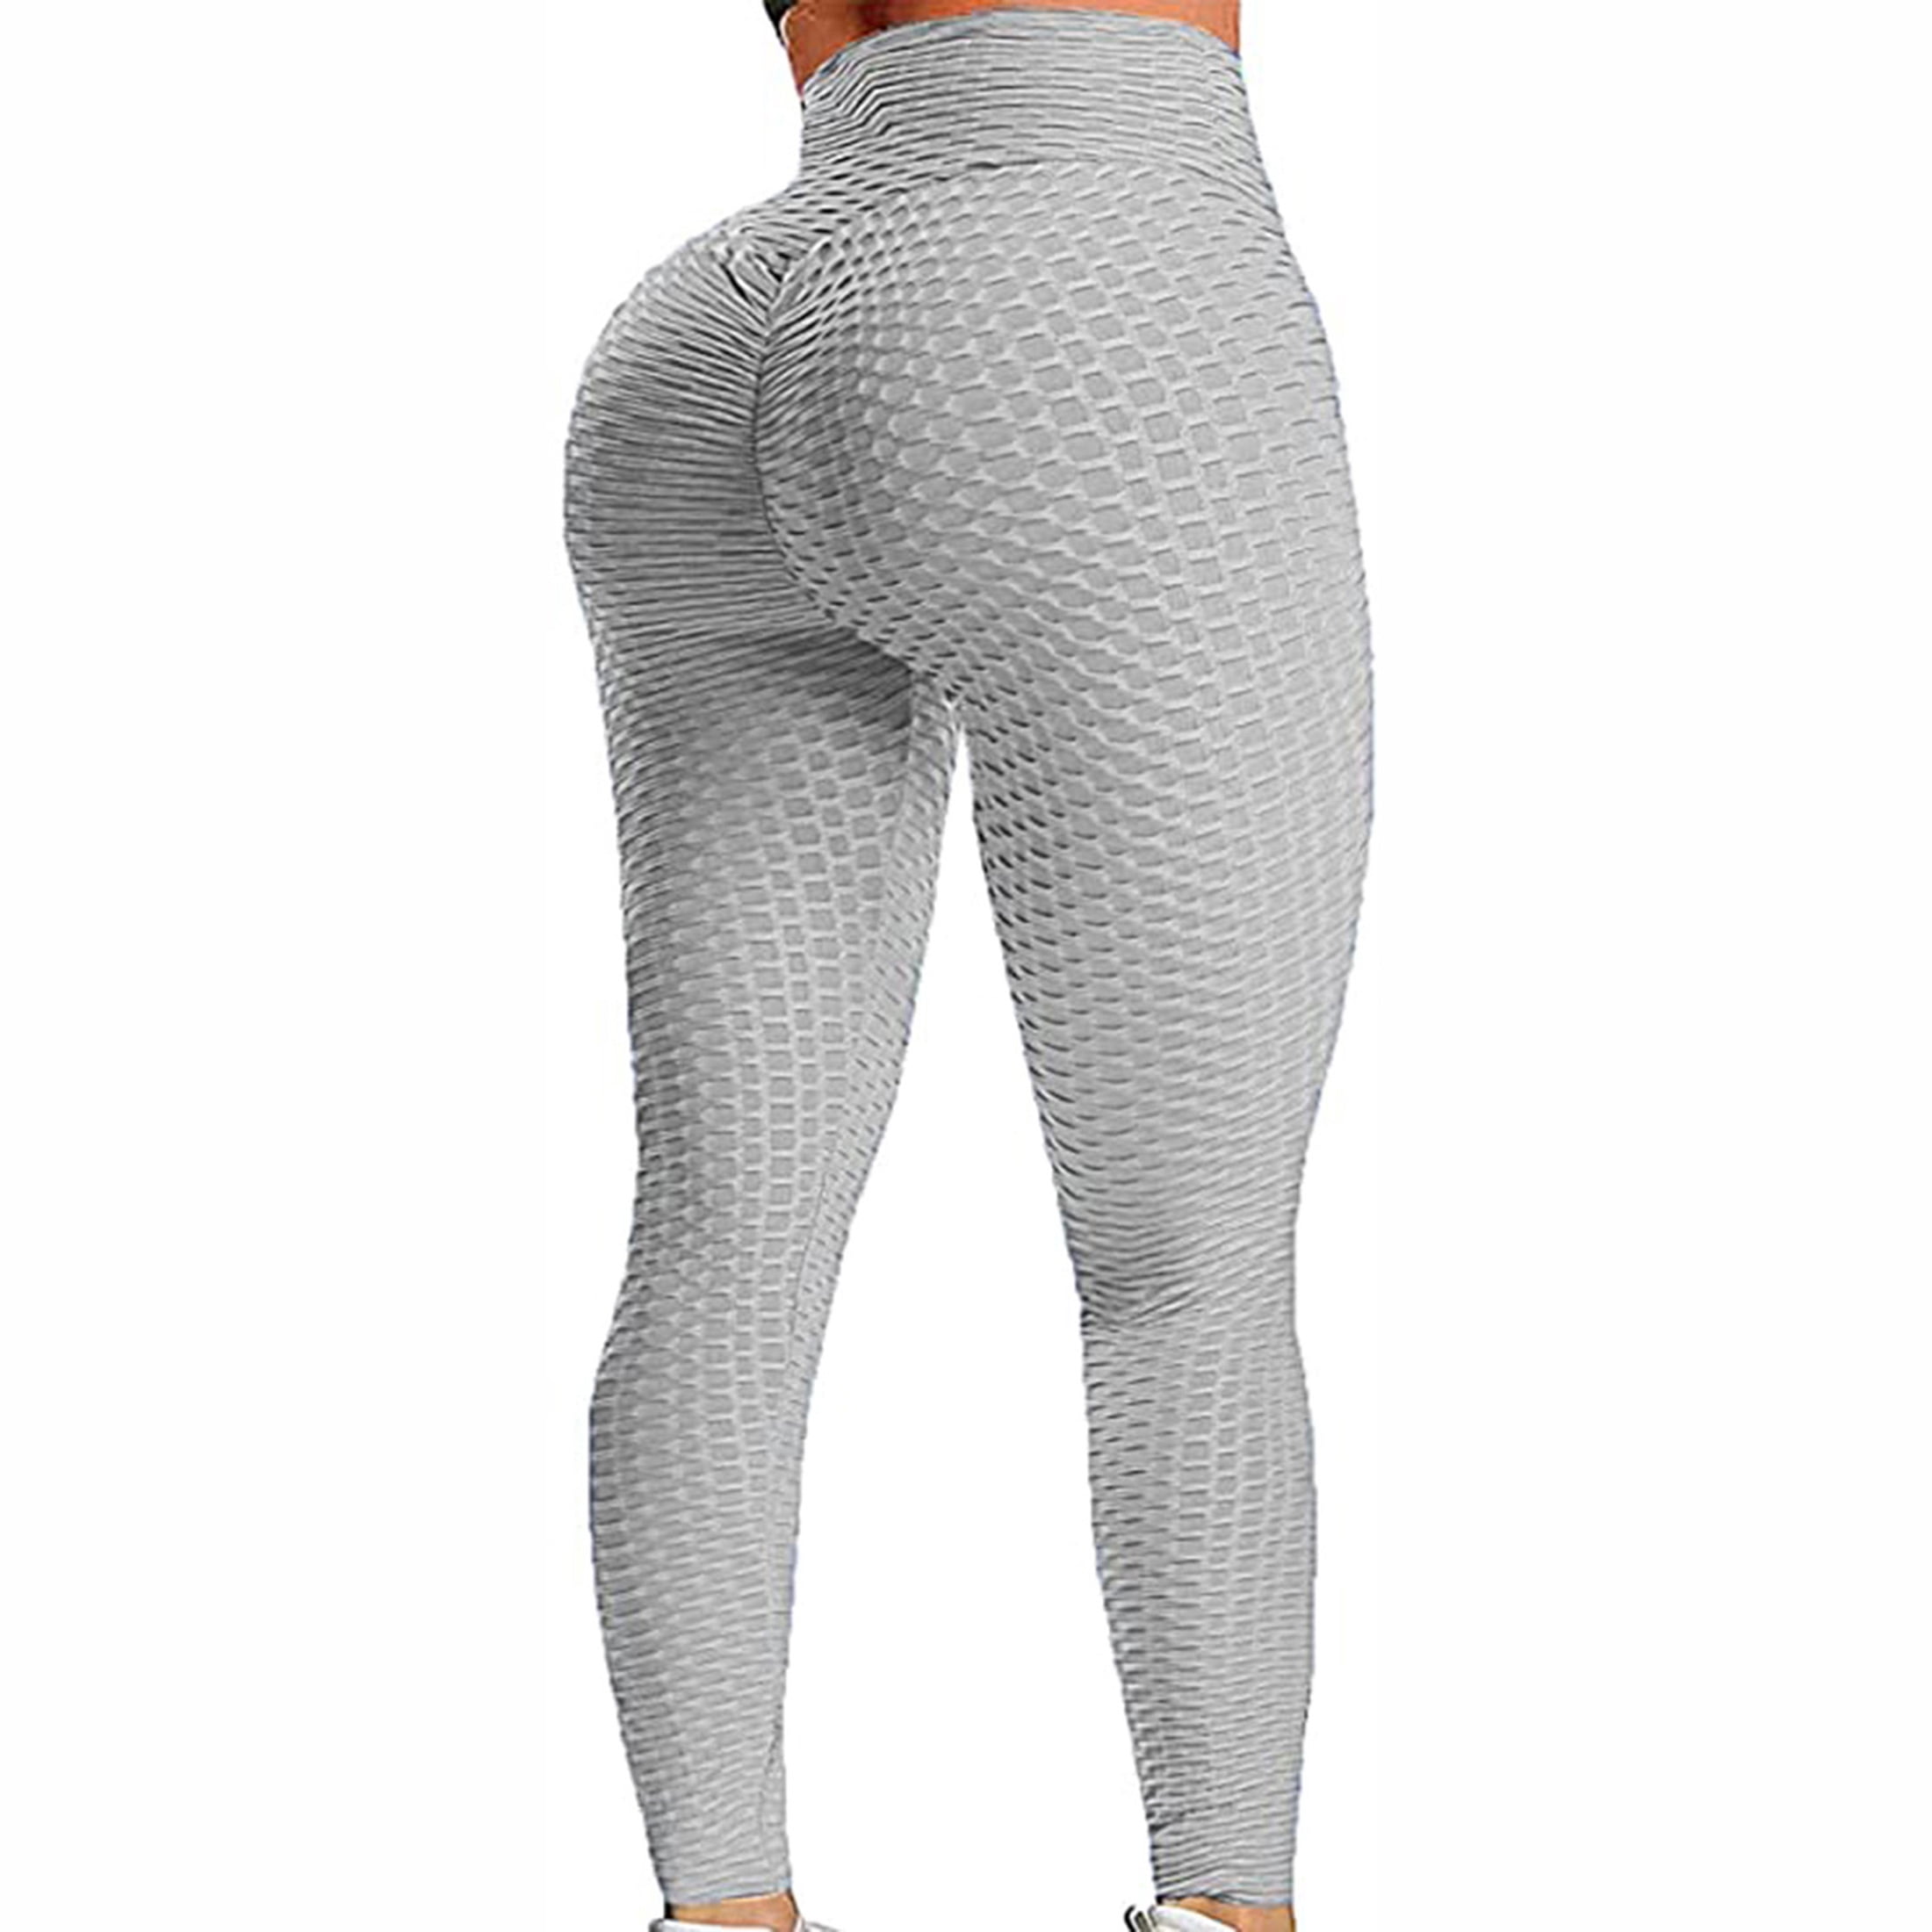 JGS1996 High Waist Butt Lifting Leggings for Women Tummy Control Workout  Ruched Butt Lifting Stretchy Yoga Pants Textured Booty Tights 